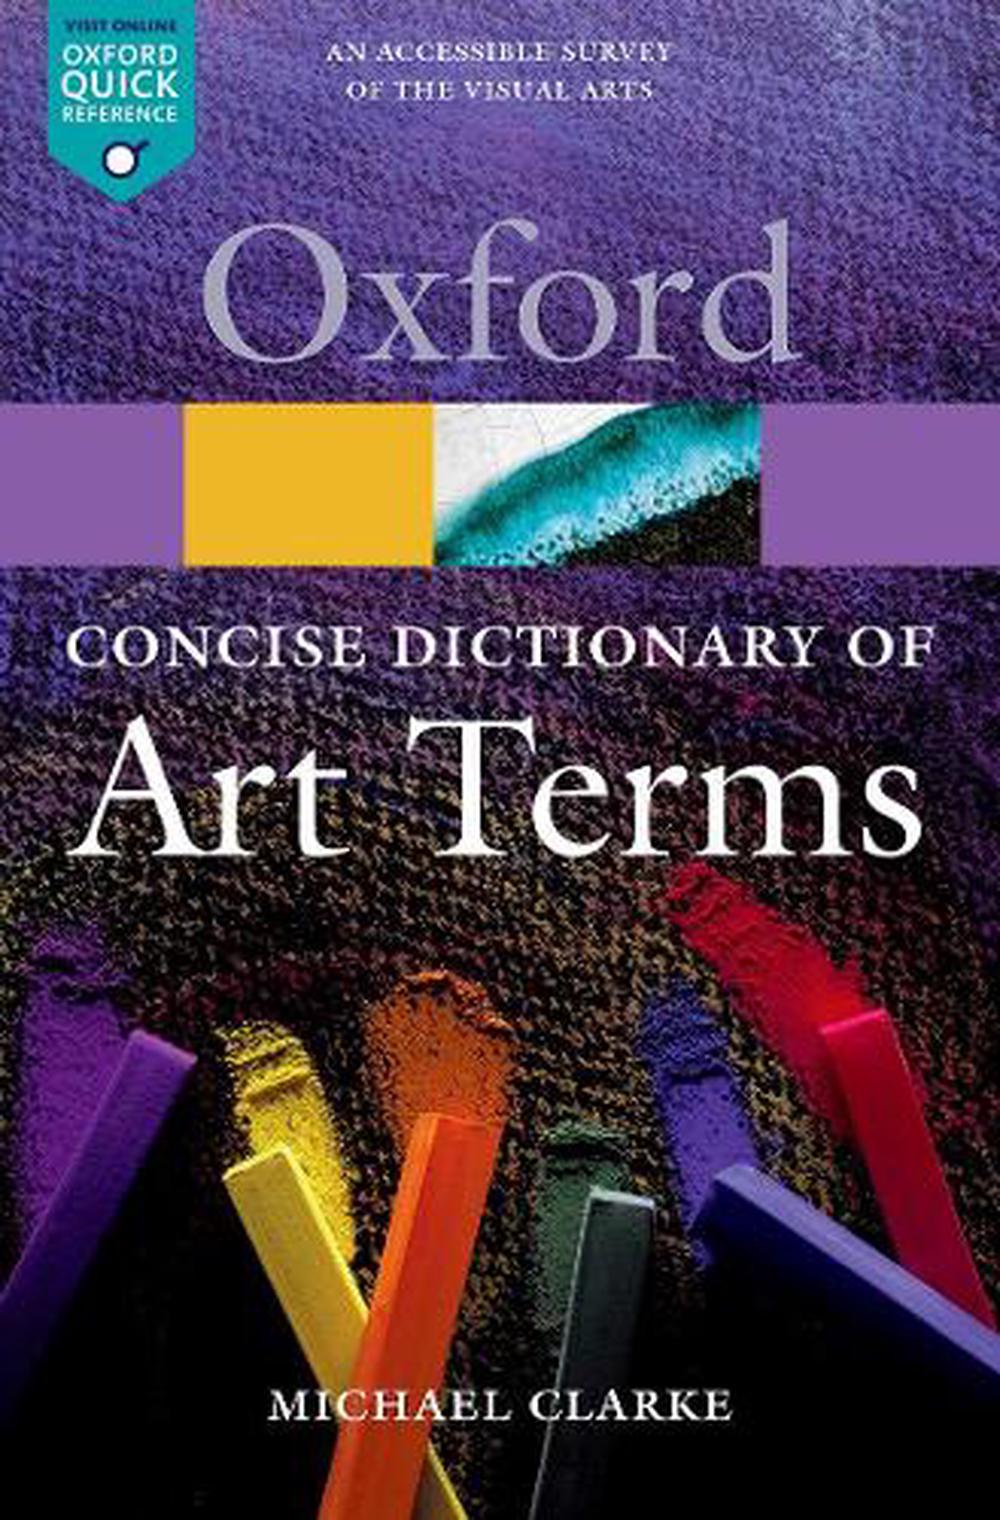 The　The　online　by　Oxford　Clarke,　9780199569922　of　Terms　at　Nile　Concise　Michael　Paperback,　Dictionary　Art　Buy